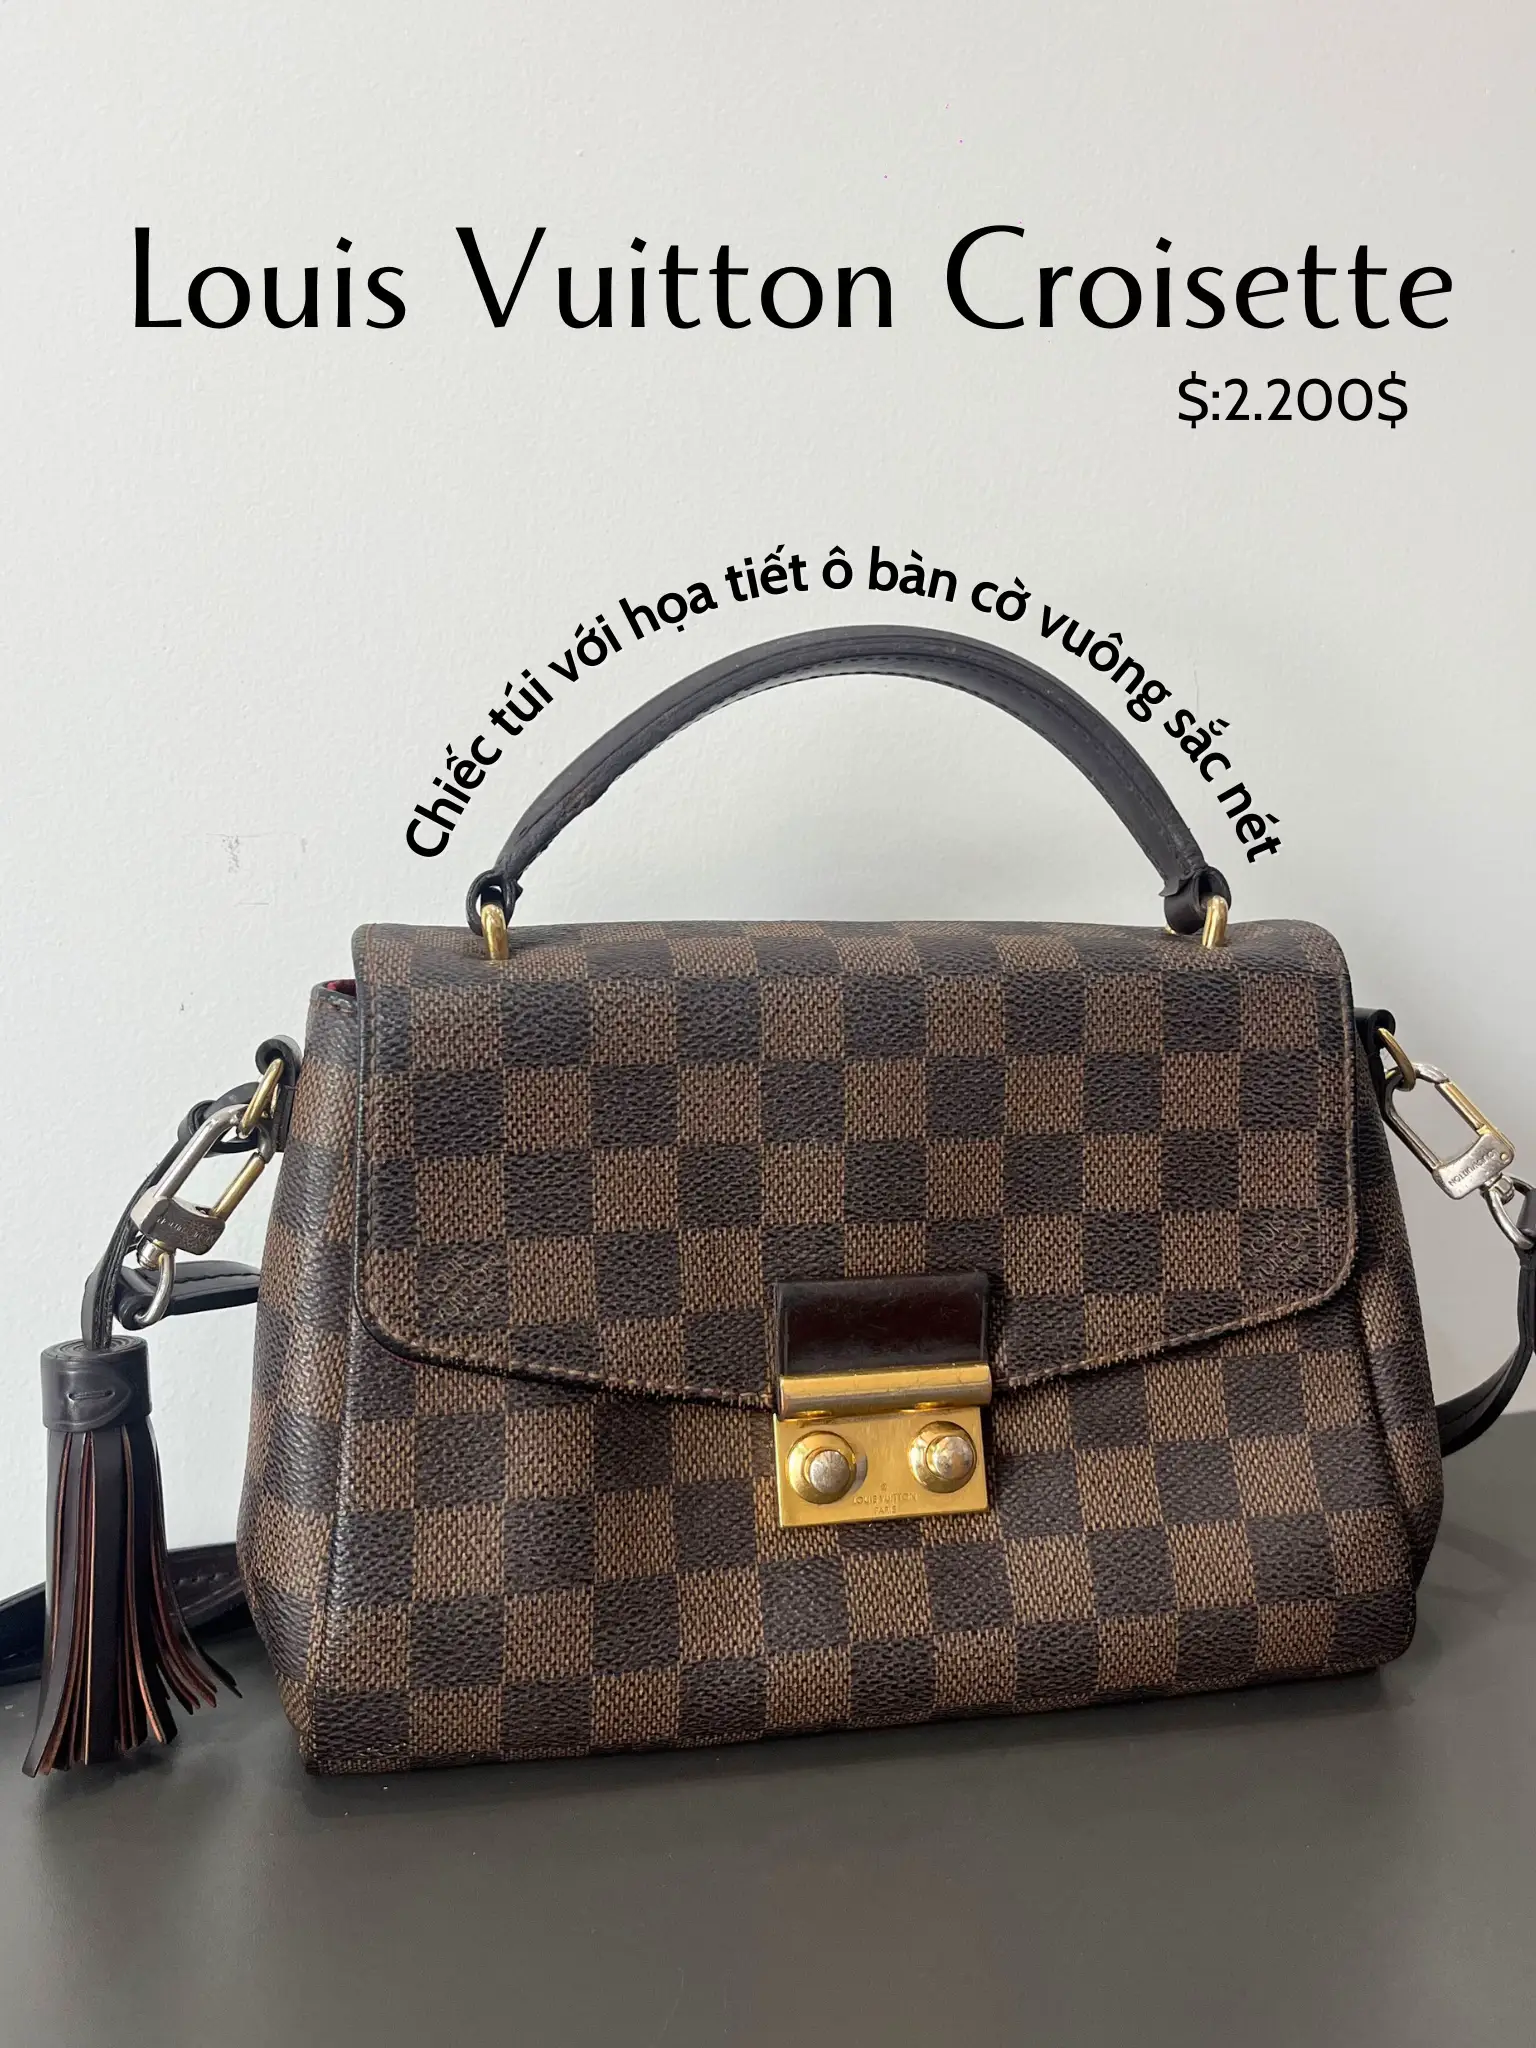 Sell or keep? I'm thinking of getting rid of my LV Croisette. I